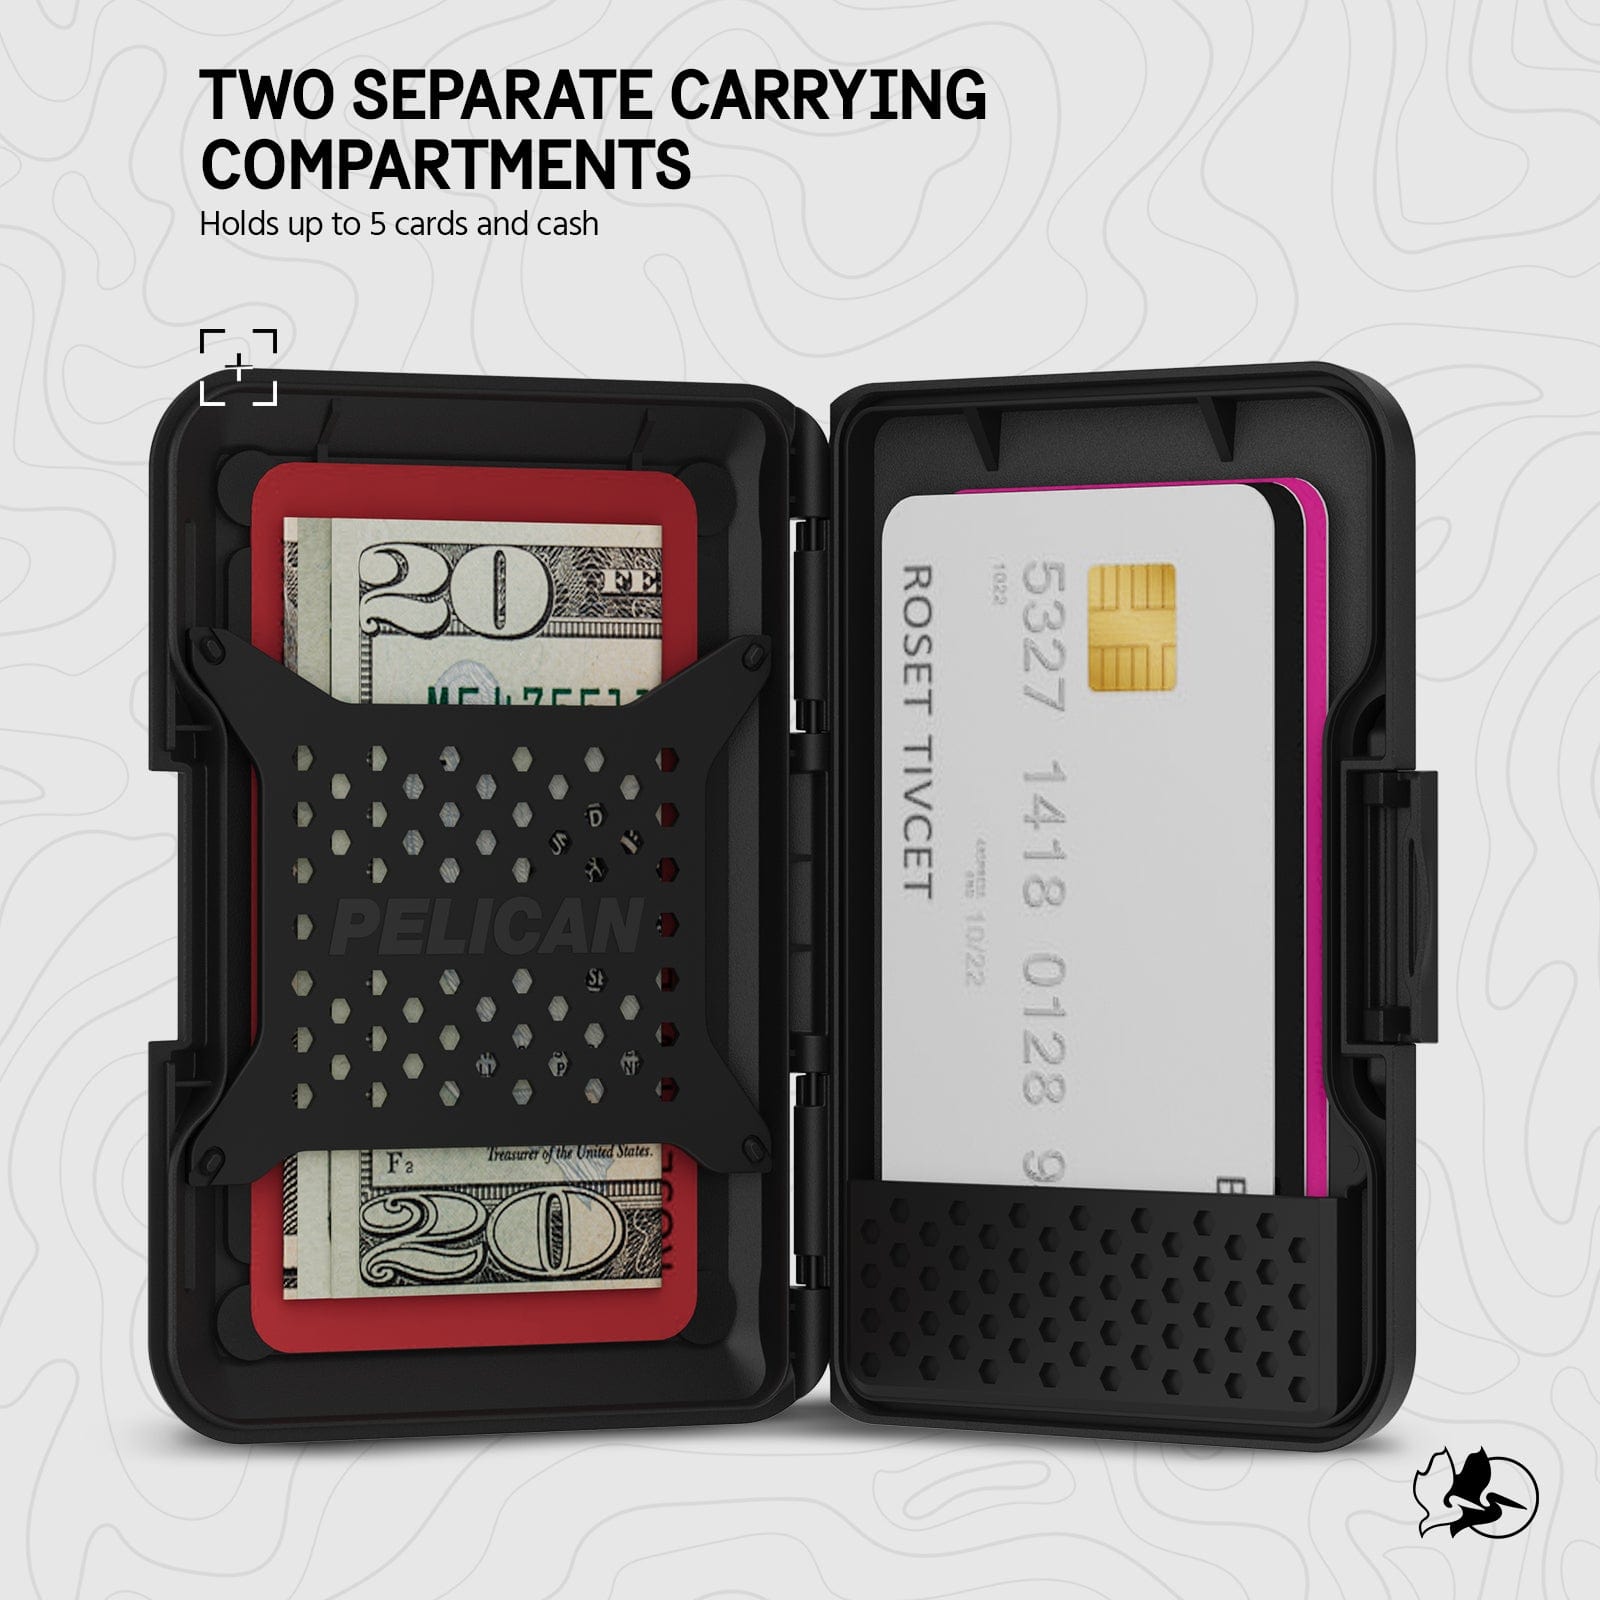 TWO SEPARATE CARRYING COMPARTMENTS. HOLDS UP TO 5 CARDS AND CASH